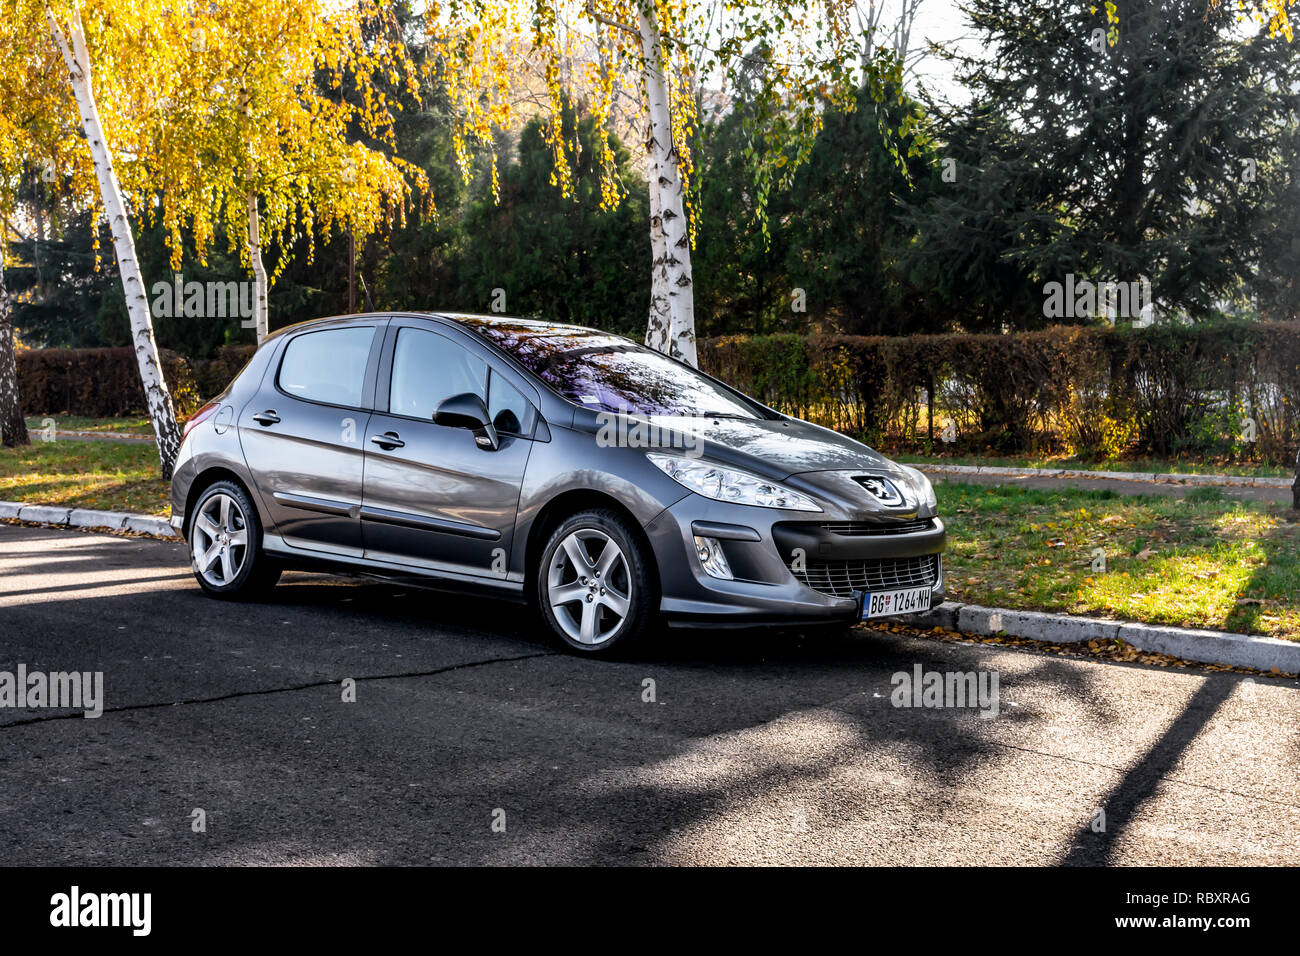 Belgrade, Serbia - 11.21.2018 / Peugeot 308 2.0 hdi, with gray color,  parked on the street, near tree with yellow leaves, big alloy wheels Stock  Photo - Alamy